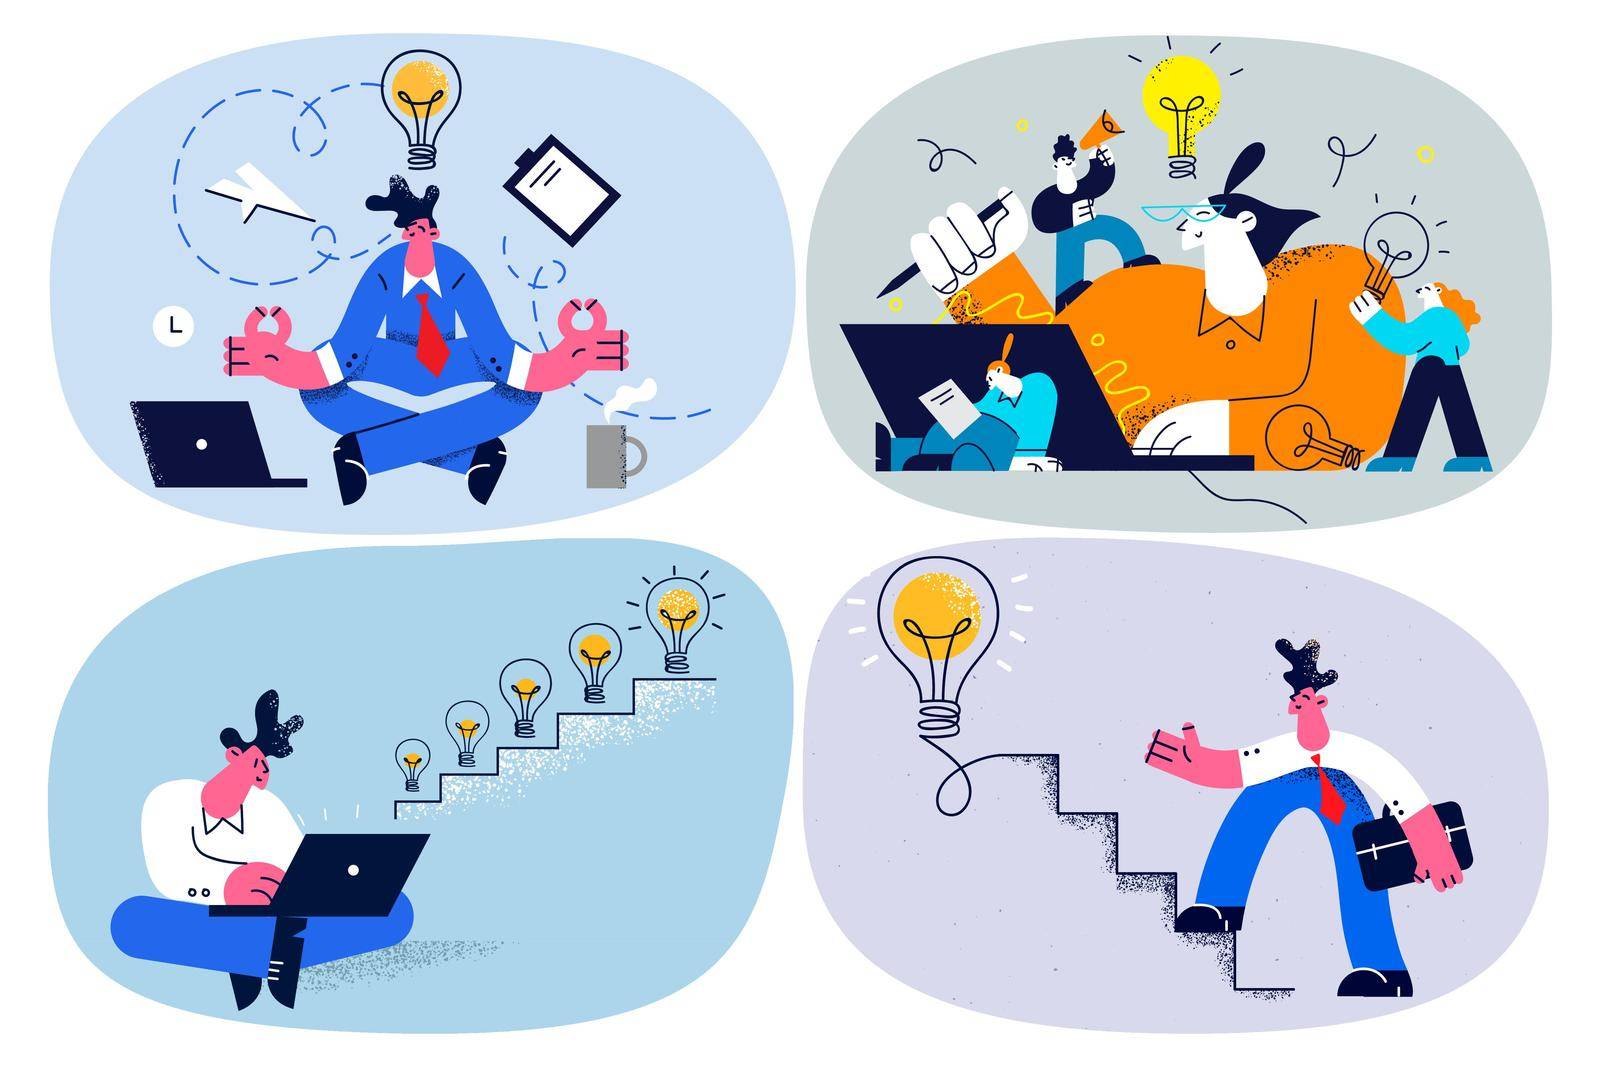 Businesspeople go up career stairs generate new ideas in business. Employee brainstorm engaged in startup project or strategy development. Problem solution. Employment. Flat vector illustration. Set.